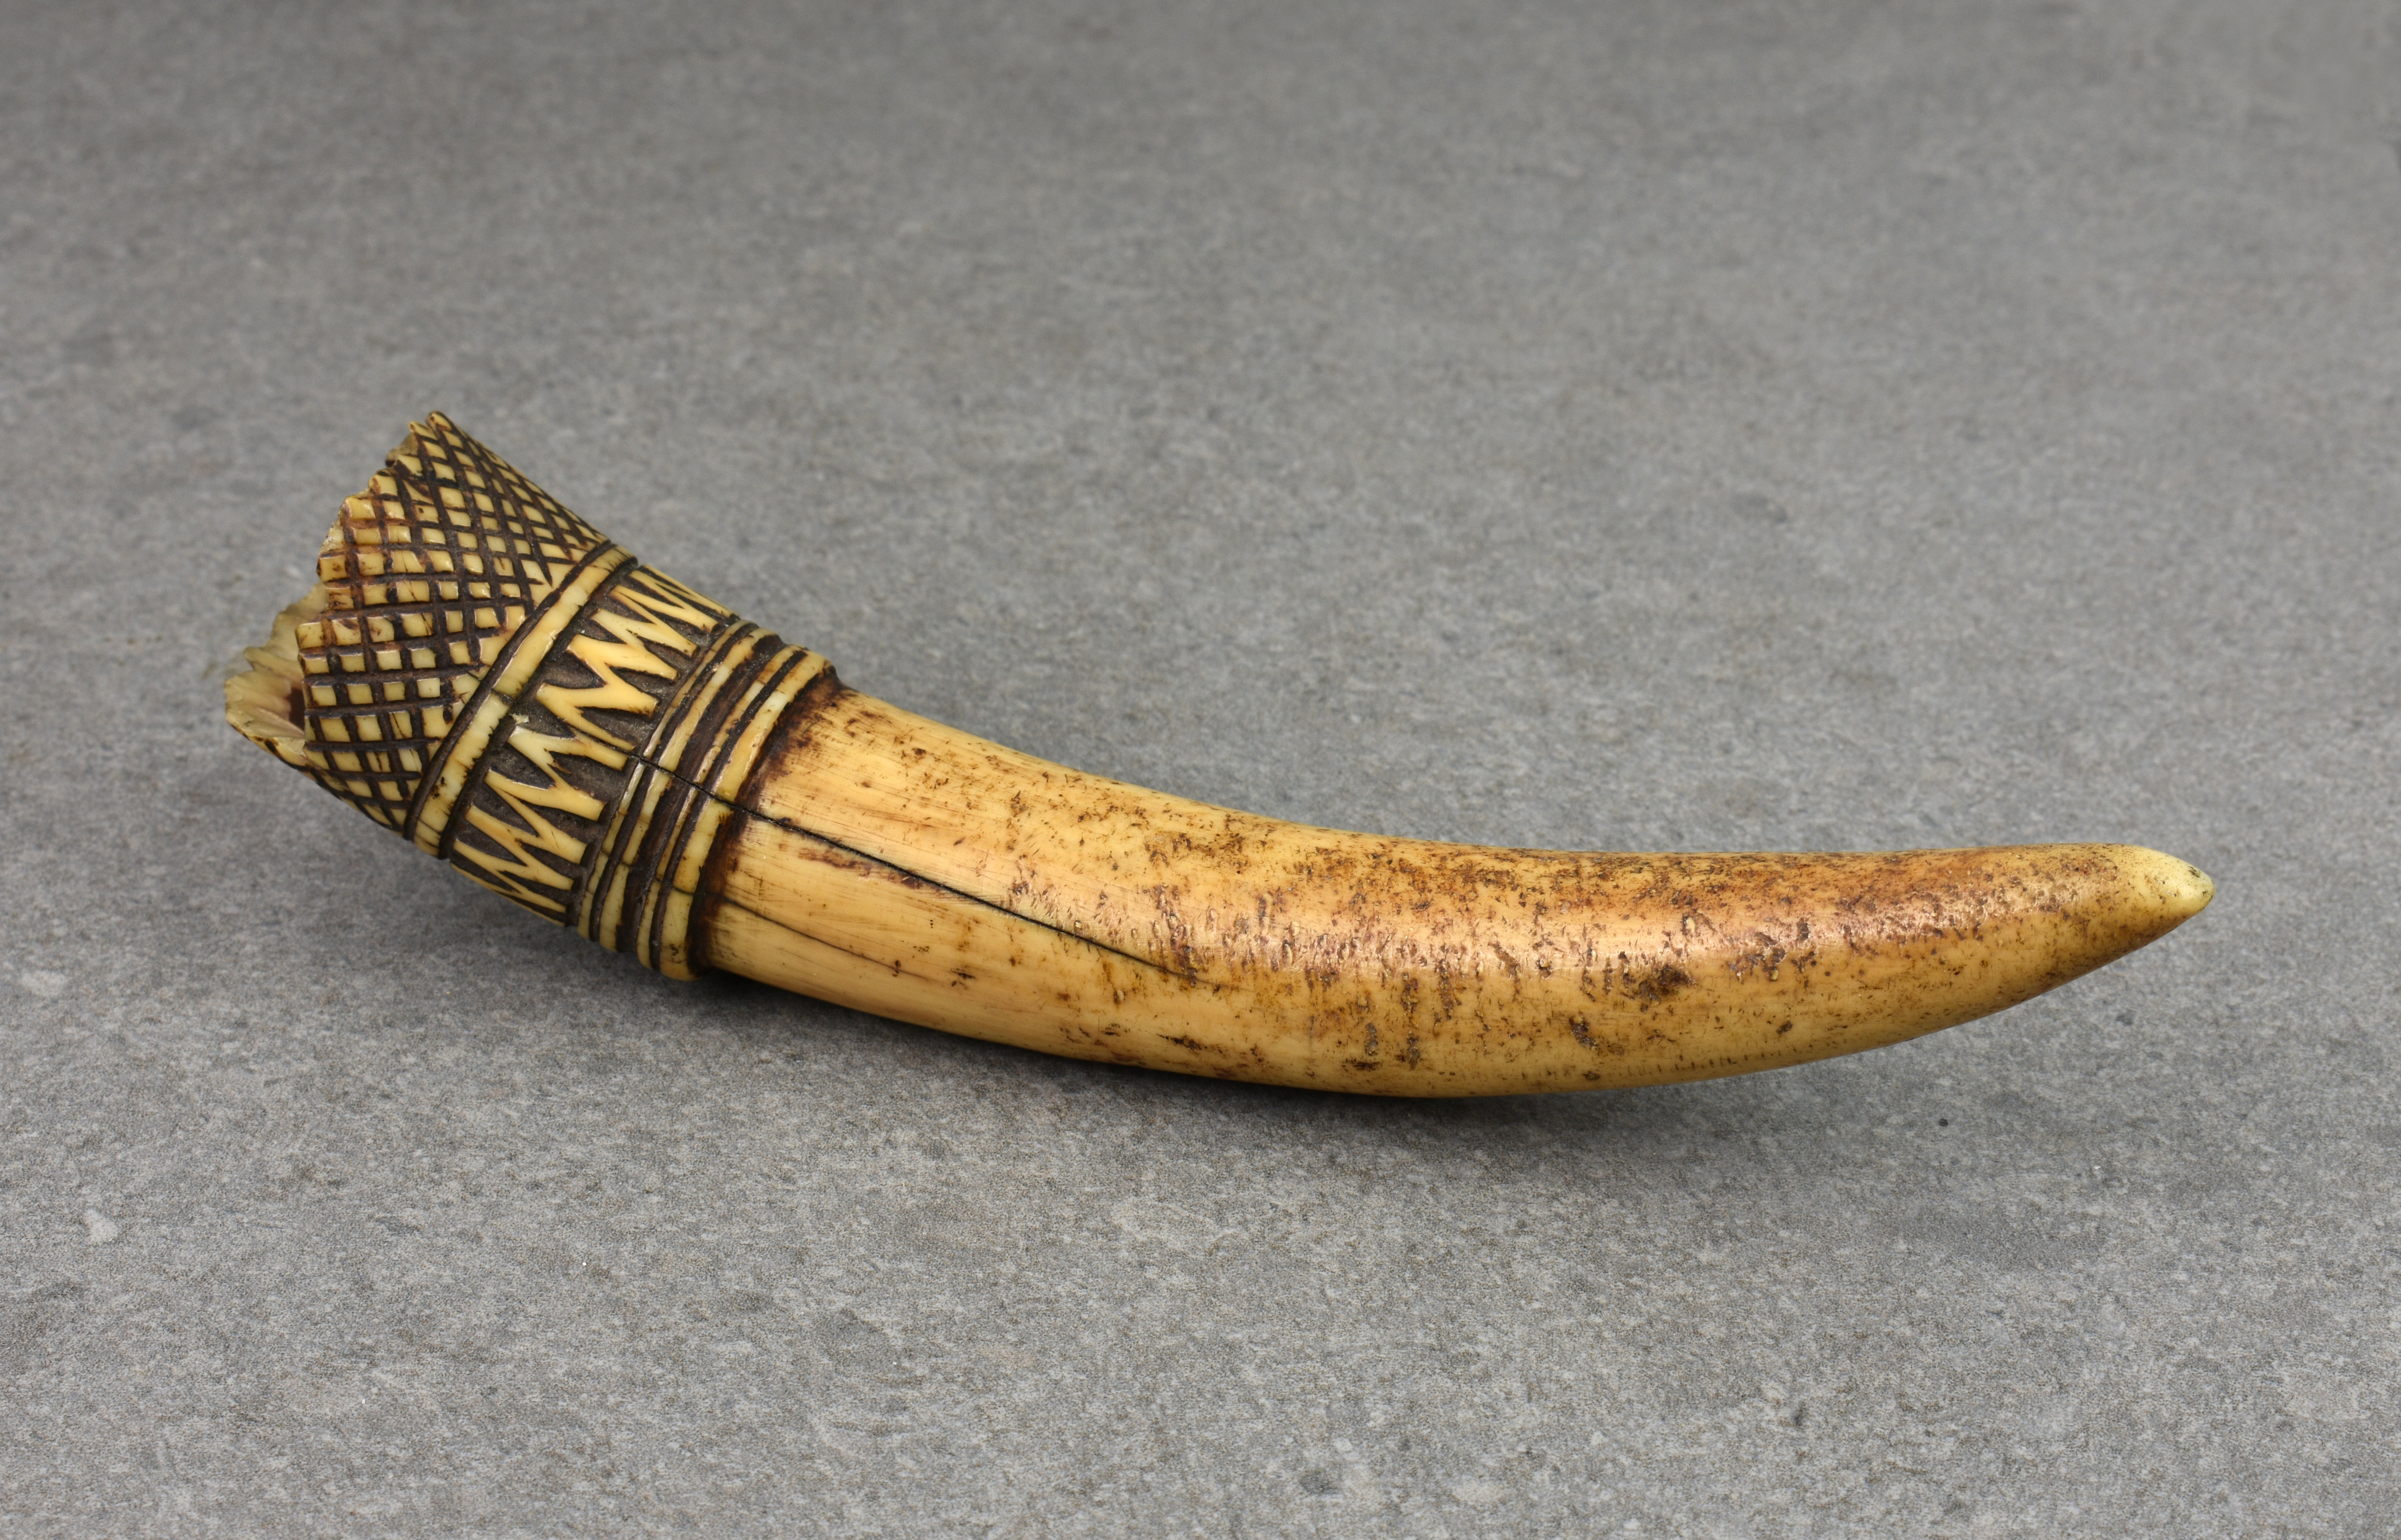 A 19th century or earlier carved African tribal tusk ornament, probably used hanging from a